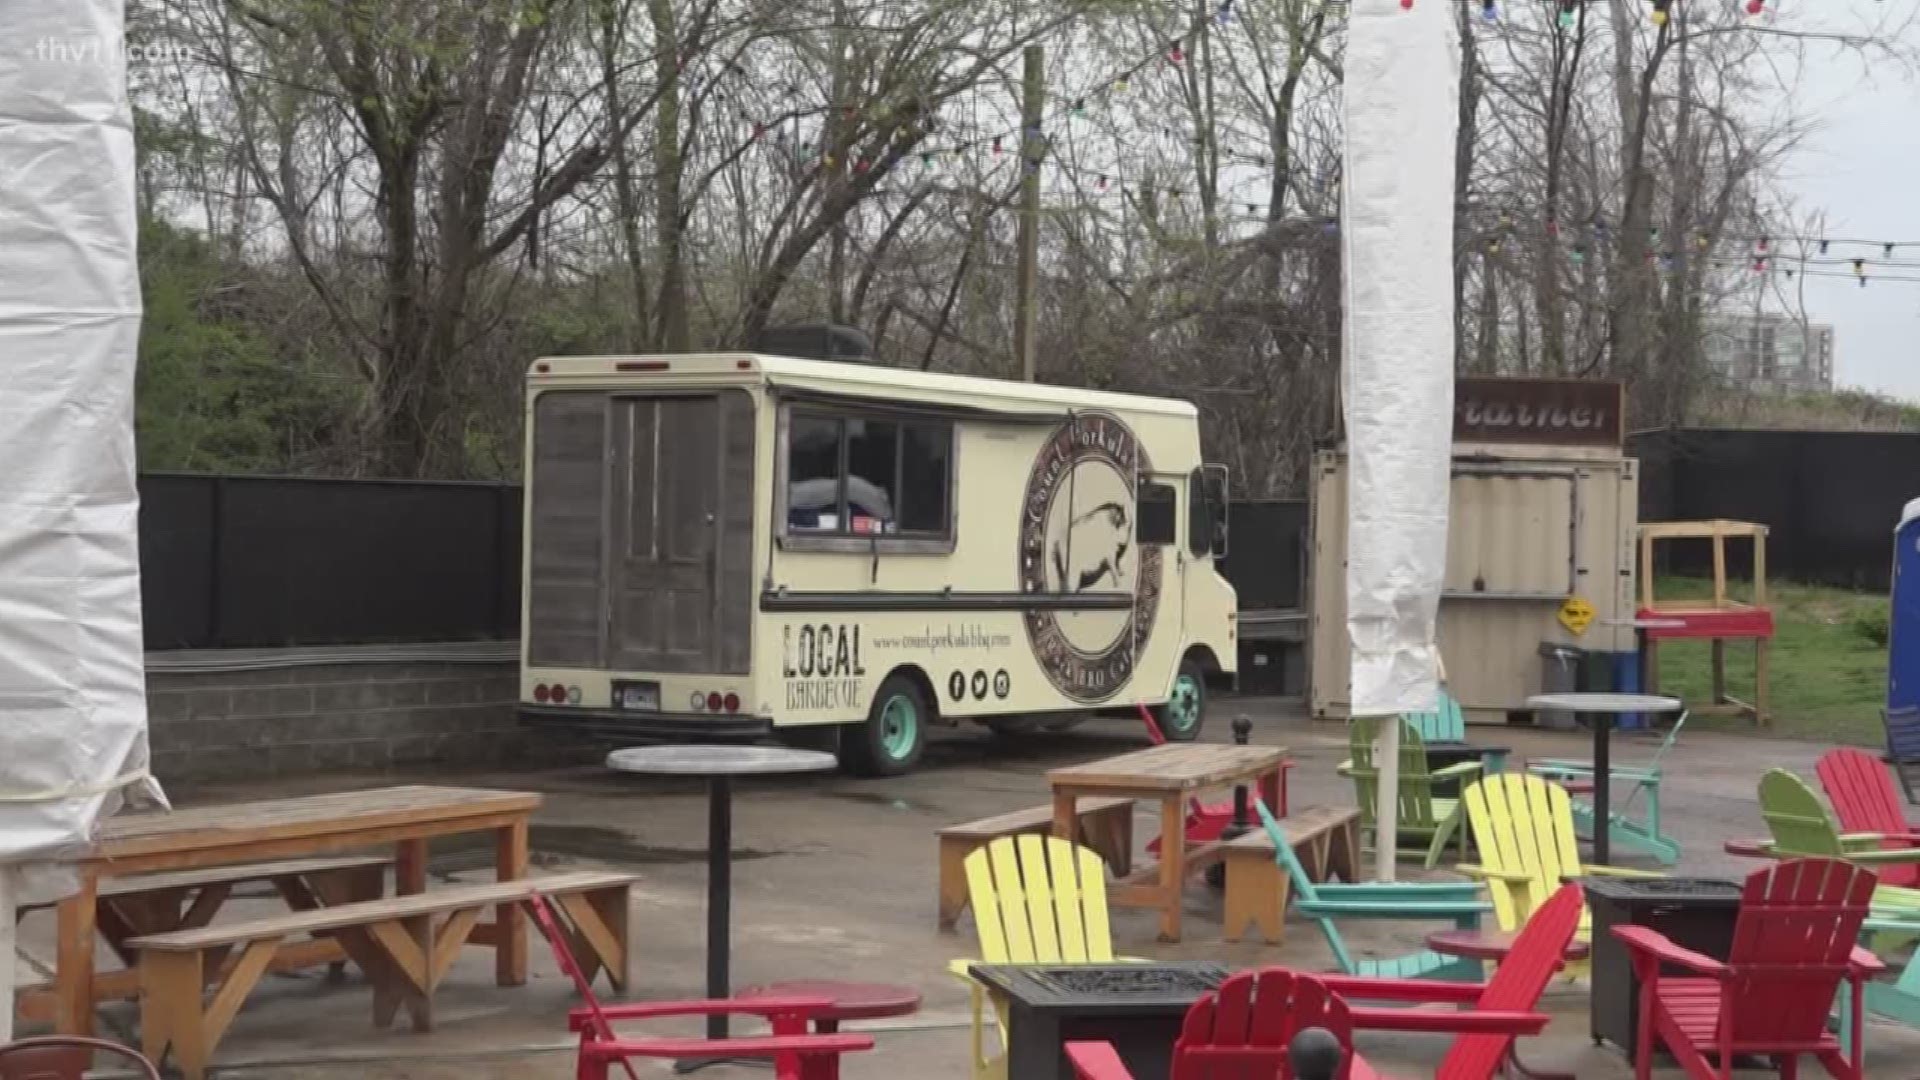 Food trucks are seeing a constant decrease in business as catering events are canceled and less people are out and about during the coronavirus outbreak.